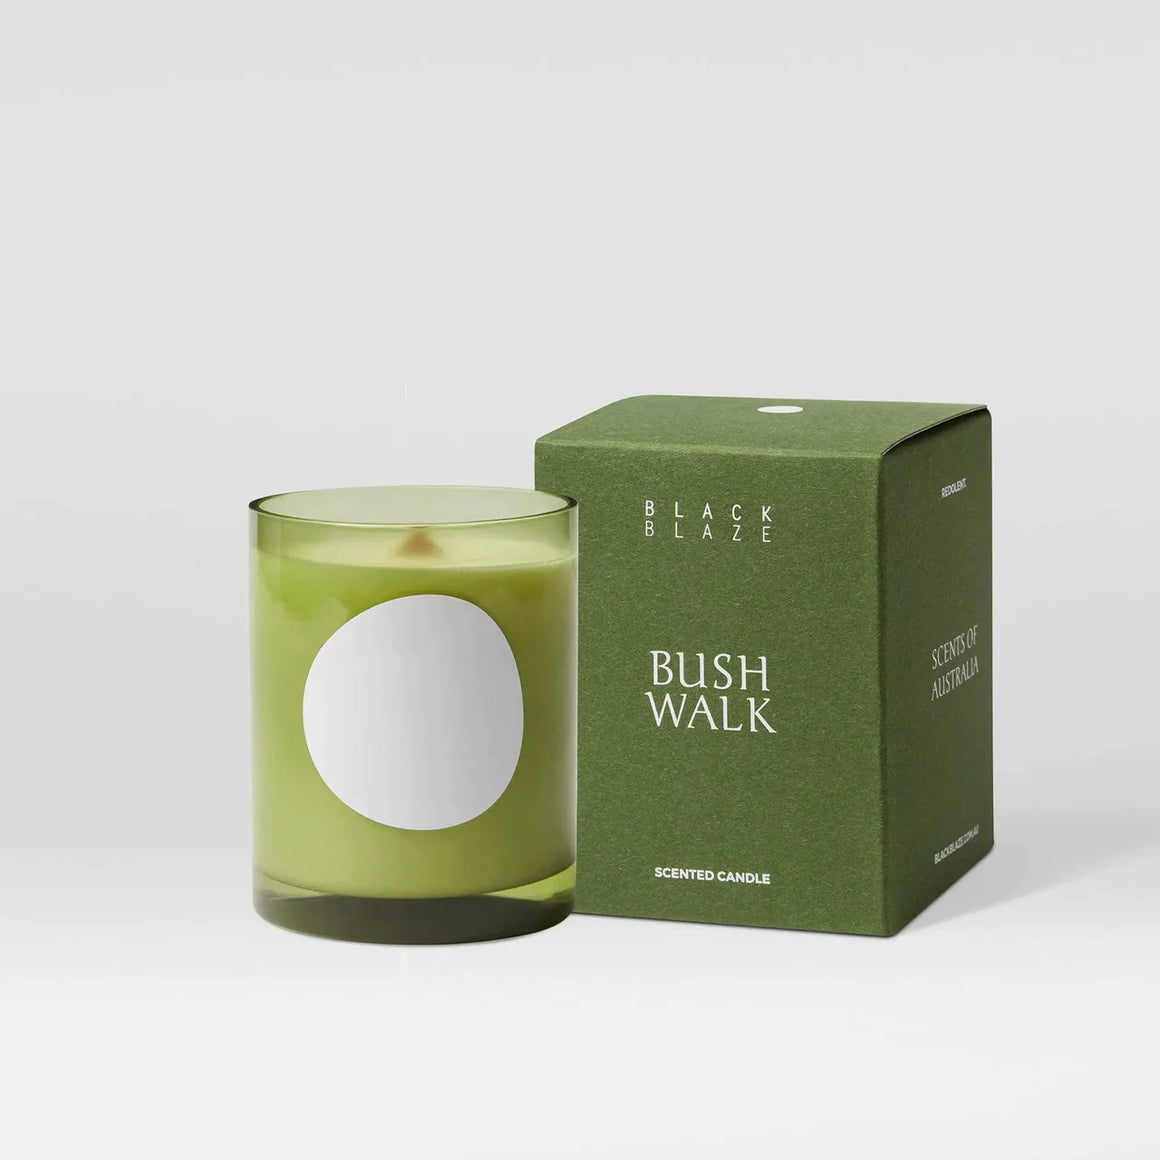 Bush Walk Scented Candle 300G